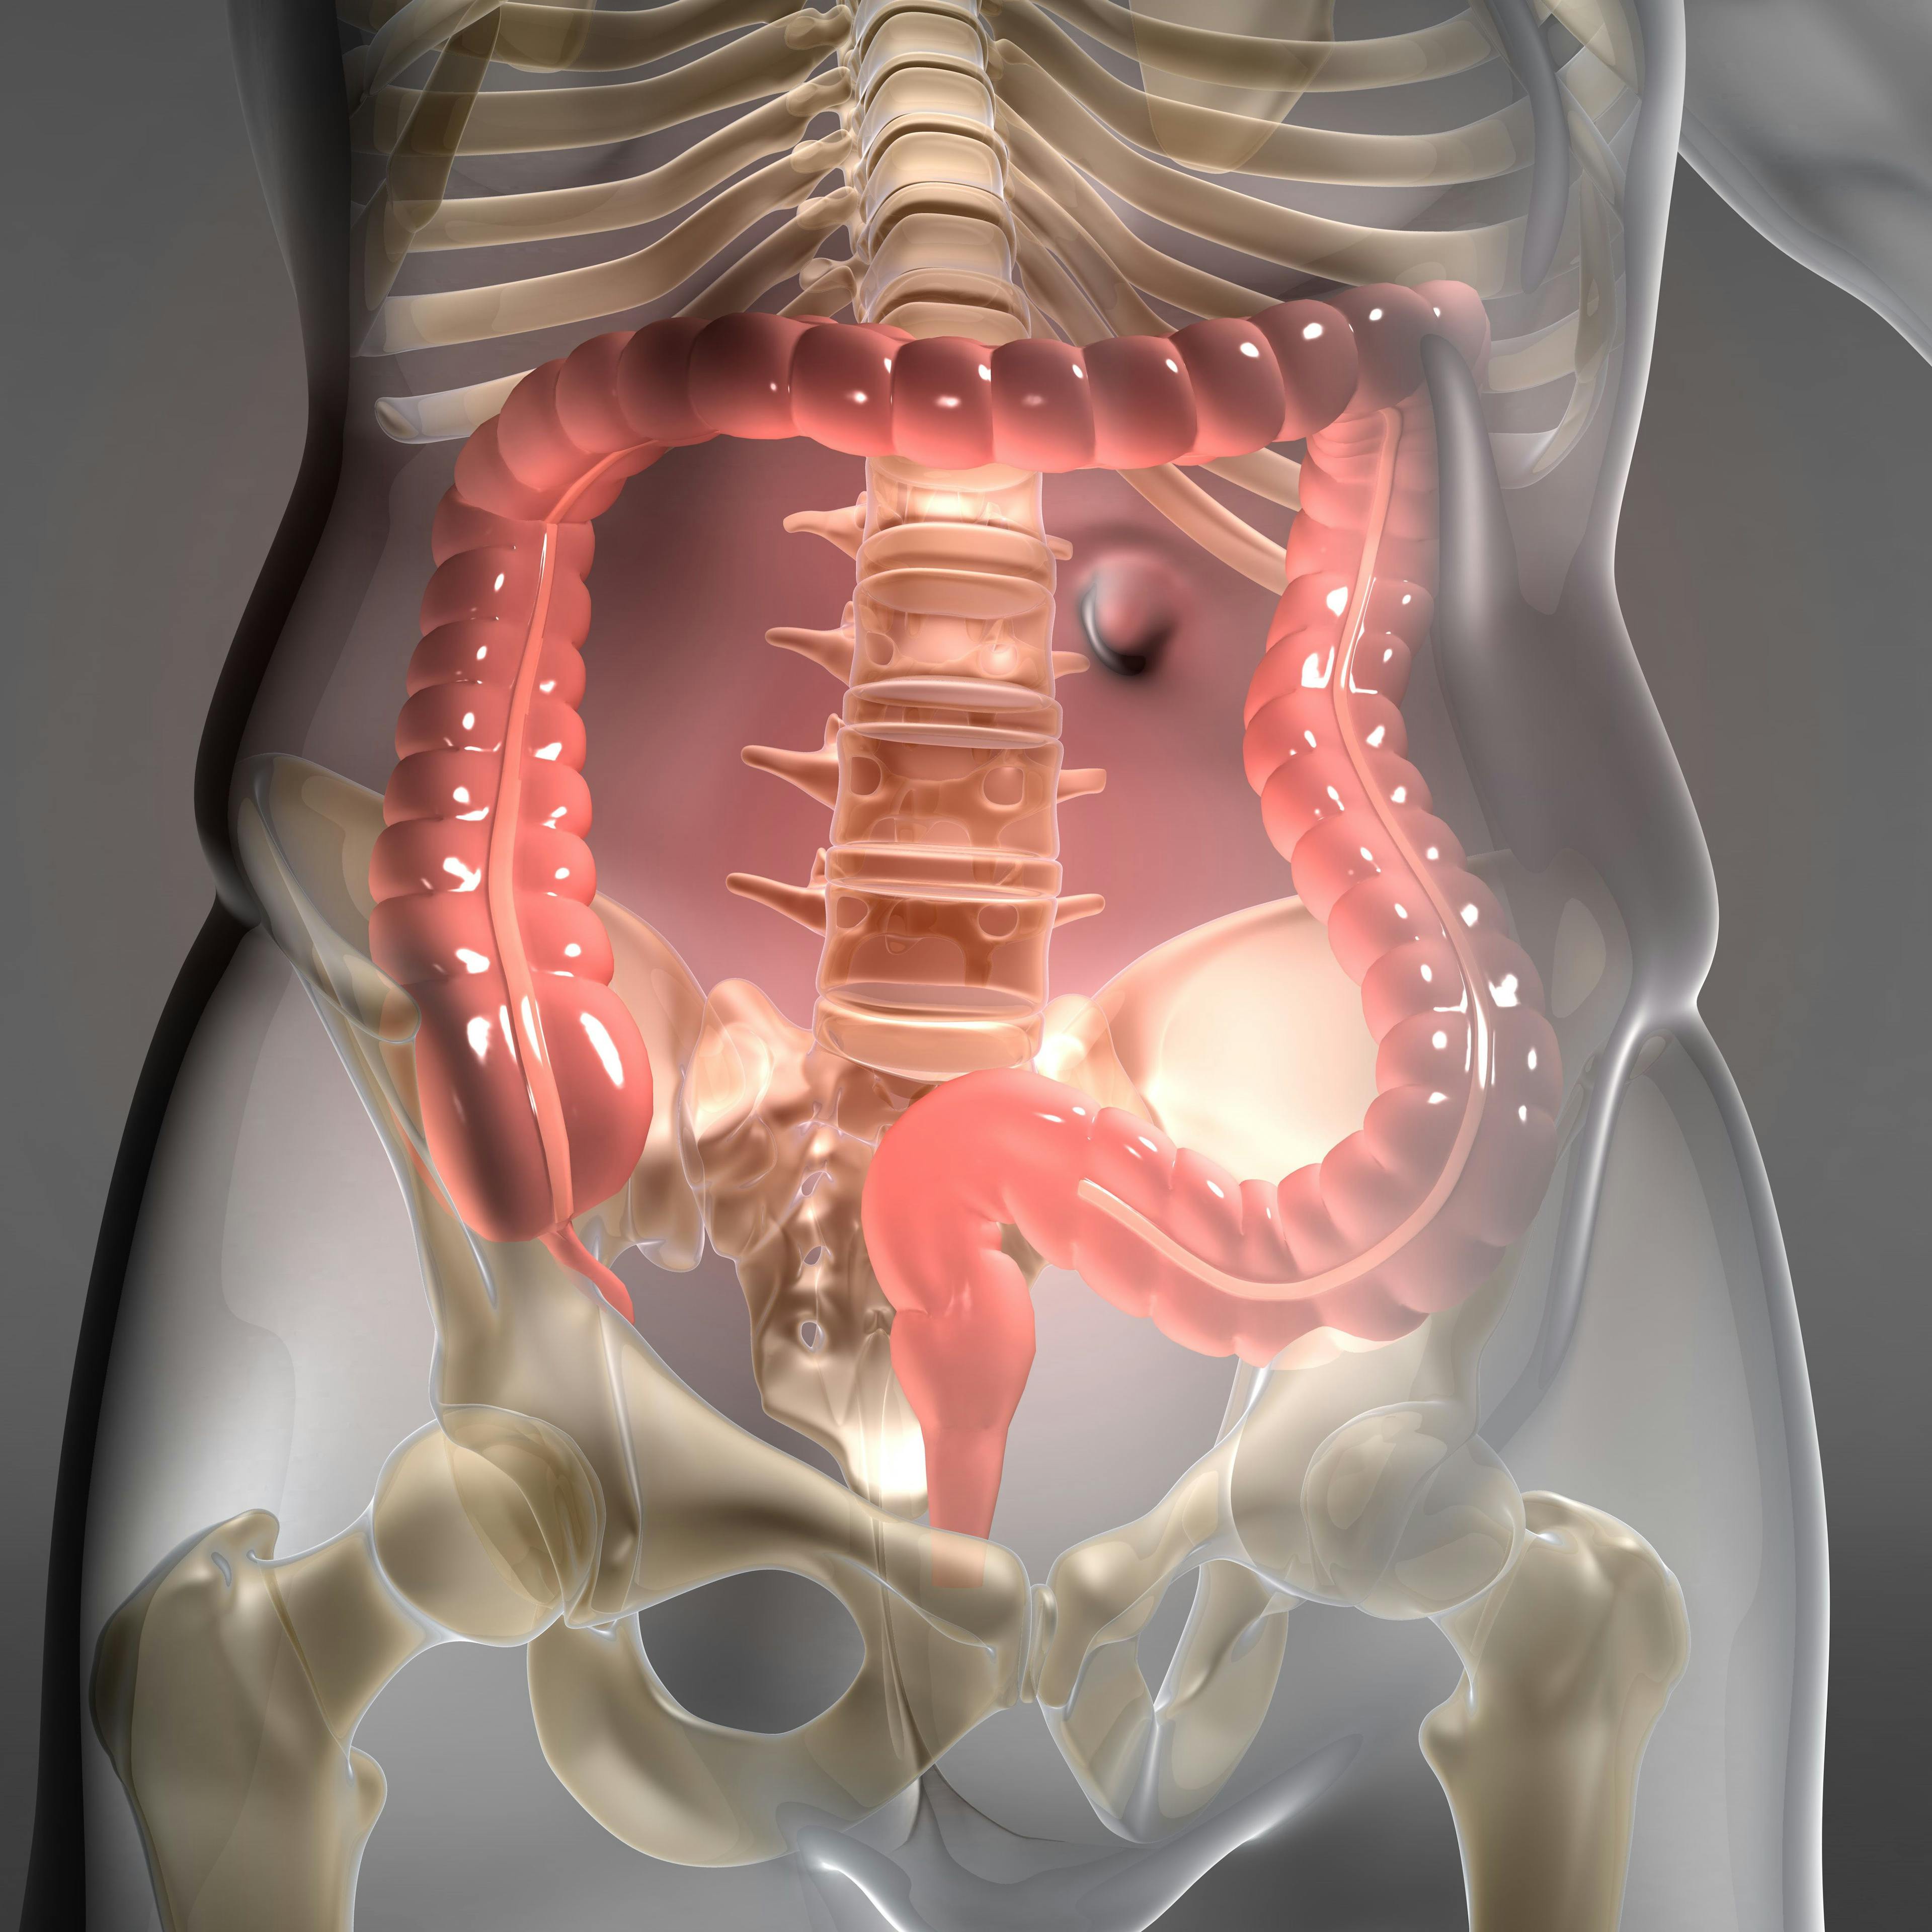 A clinical hold has been placed on the phase 1b CYAD-101-002 trial, examining pembrolizumab after treatment with CYAD-101 and folinic acid, fluorouracil, and oxaliplatin preconditioning in metastatic colorectal cancer.